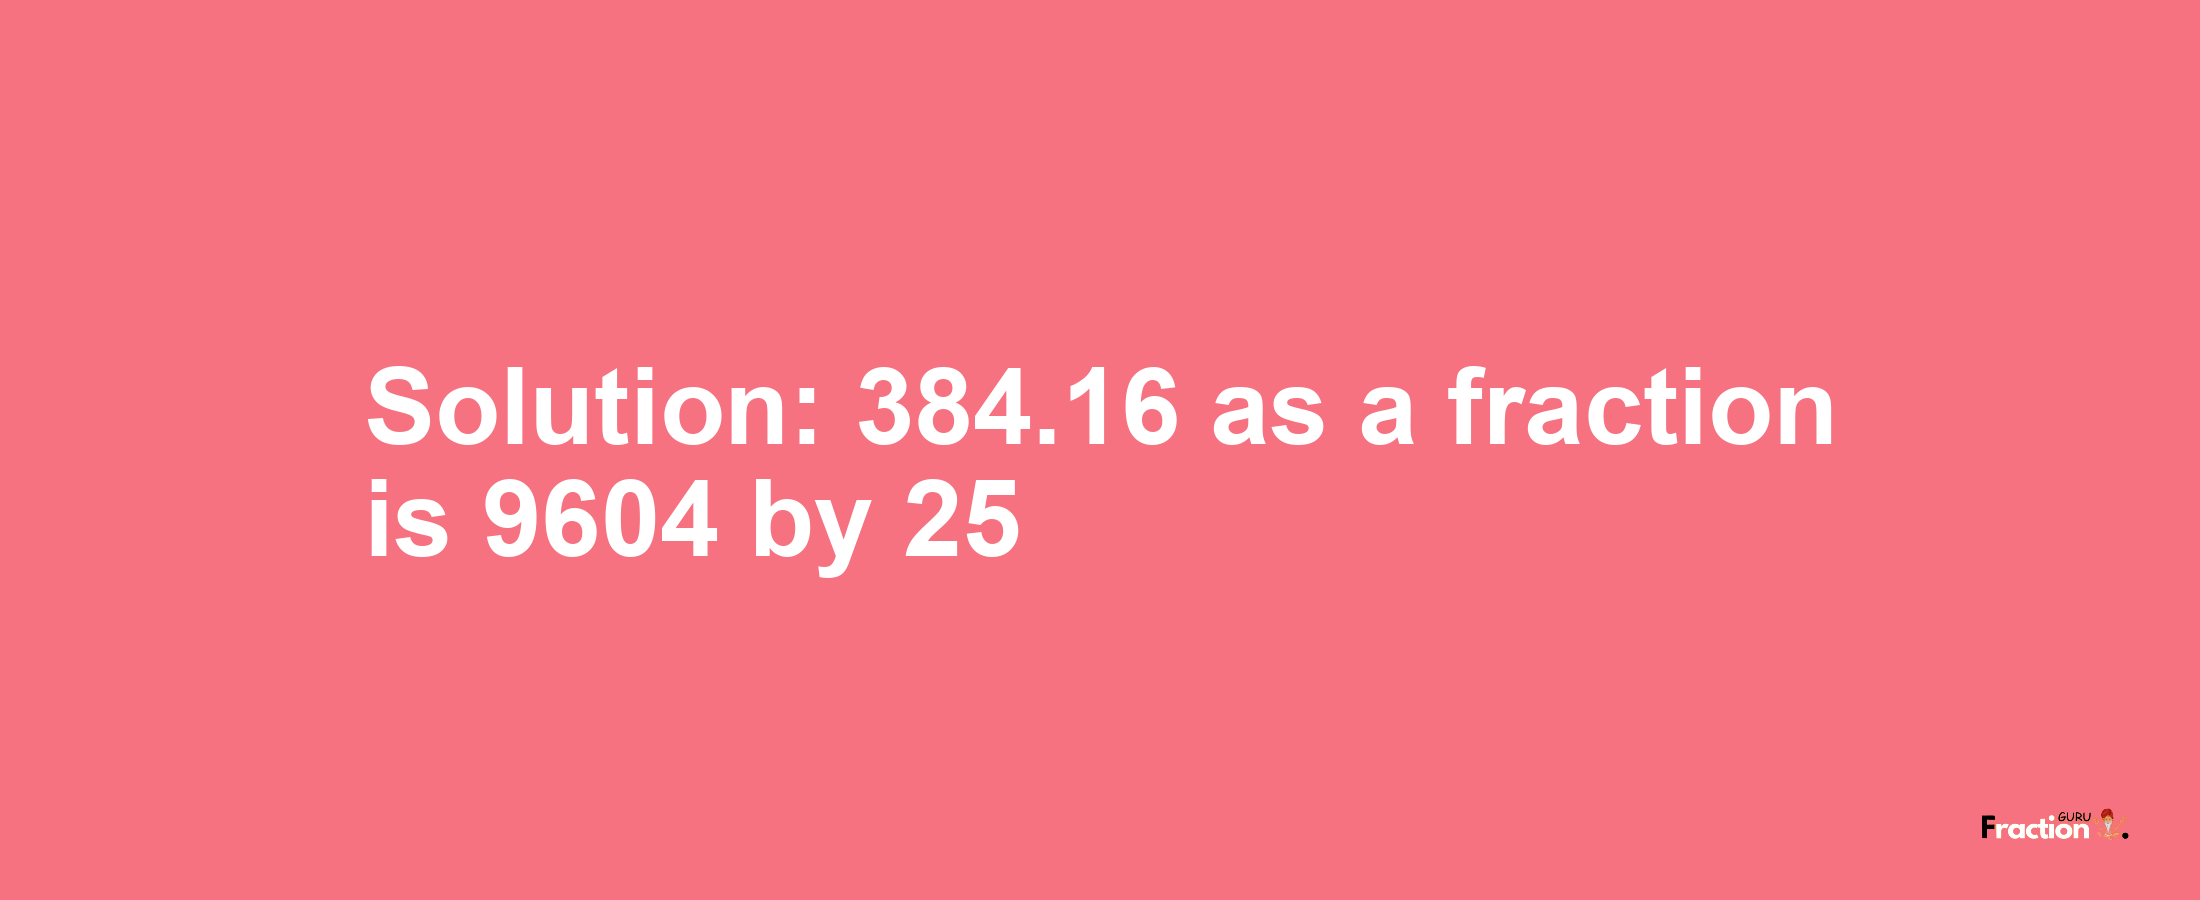 Solution:384.16 as a fraction is 9604/25